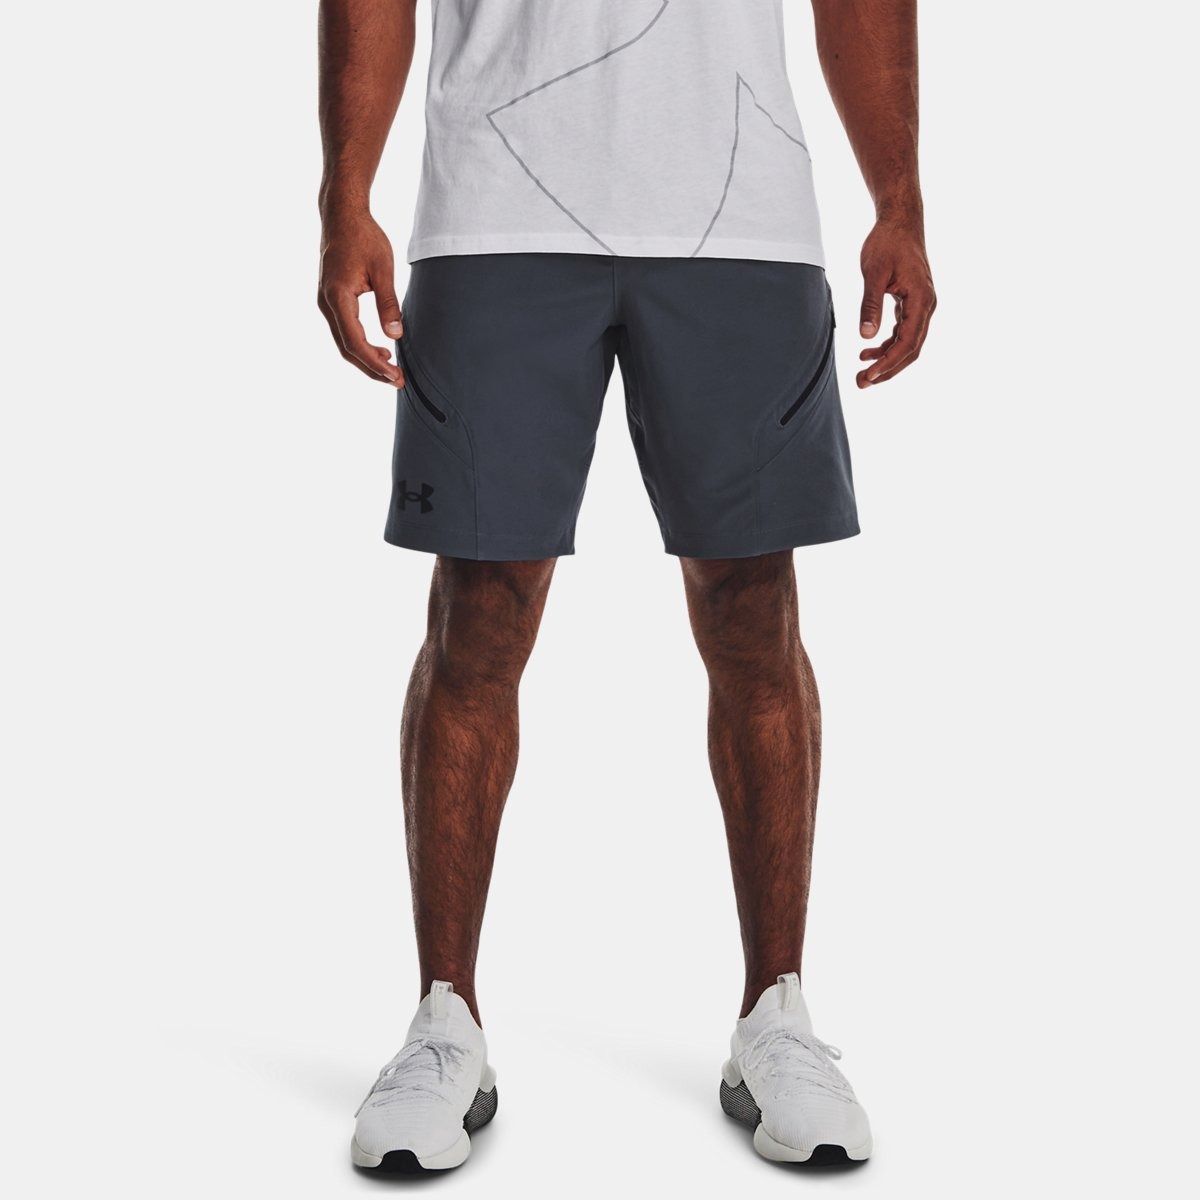 Shorts Grey for Man from Under Armour GOOFASH